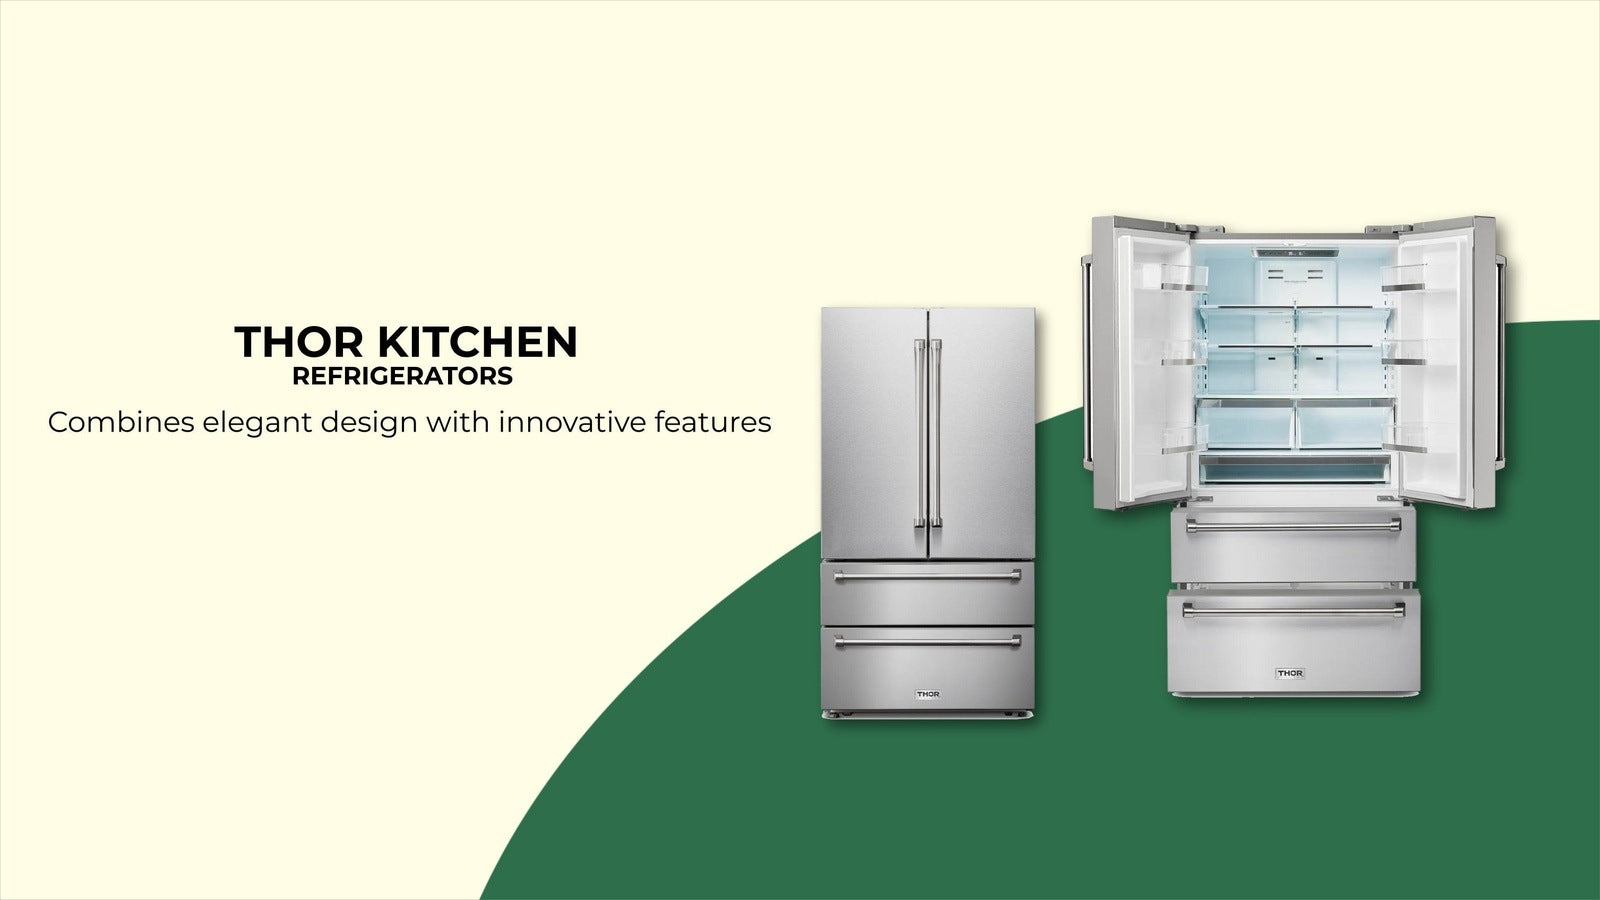 Thor Kitchen Refrigerators: Combining Style with High-Tech Features